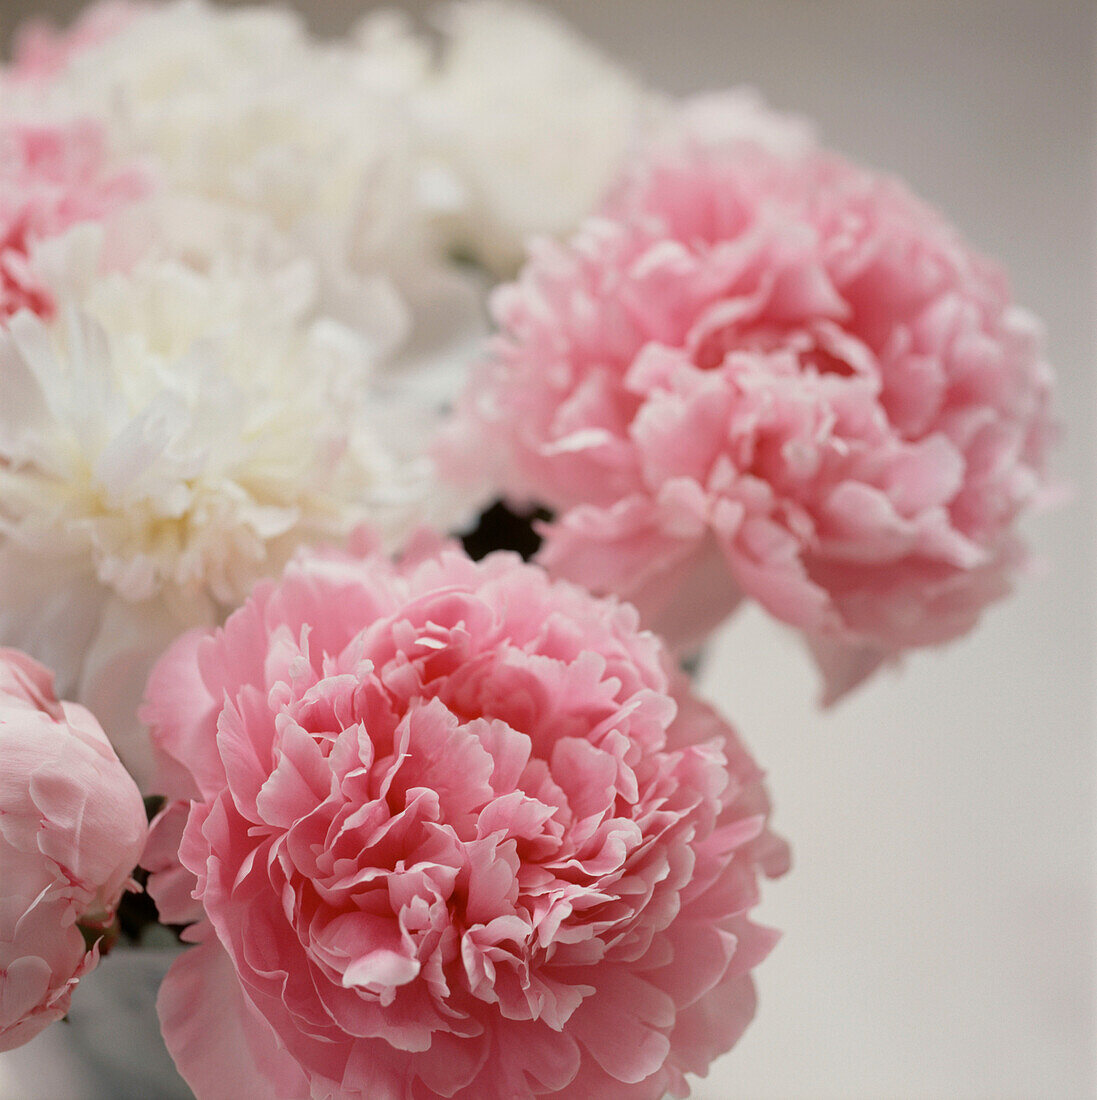 Detail of freshly cut pink and white peonies